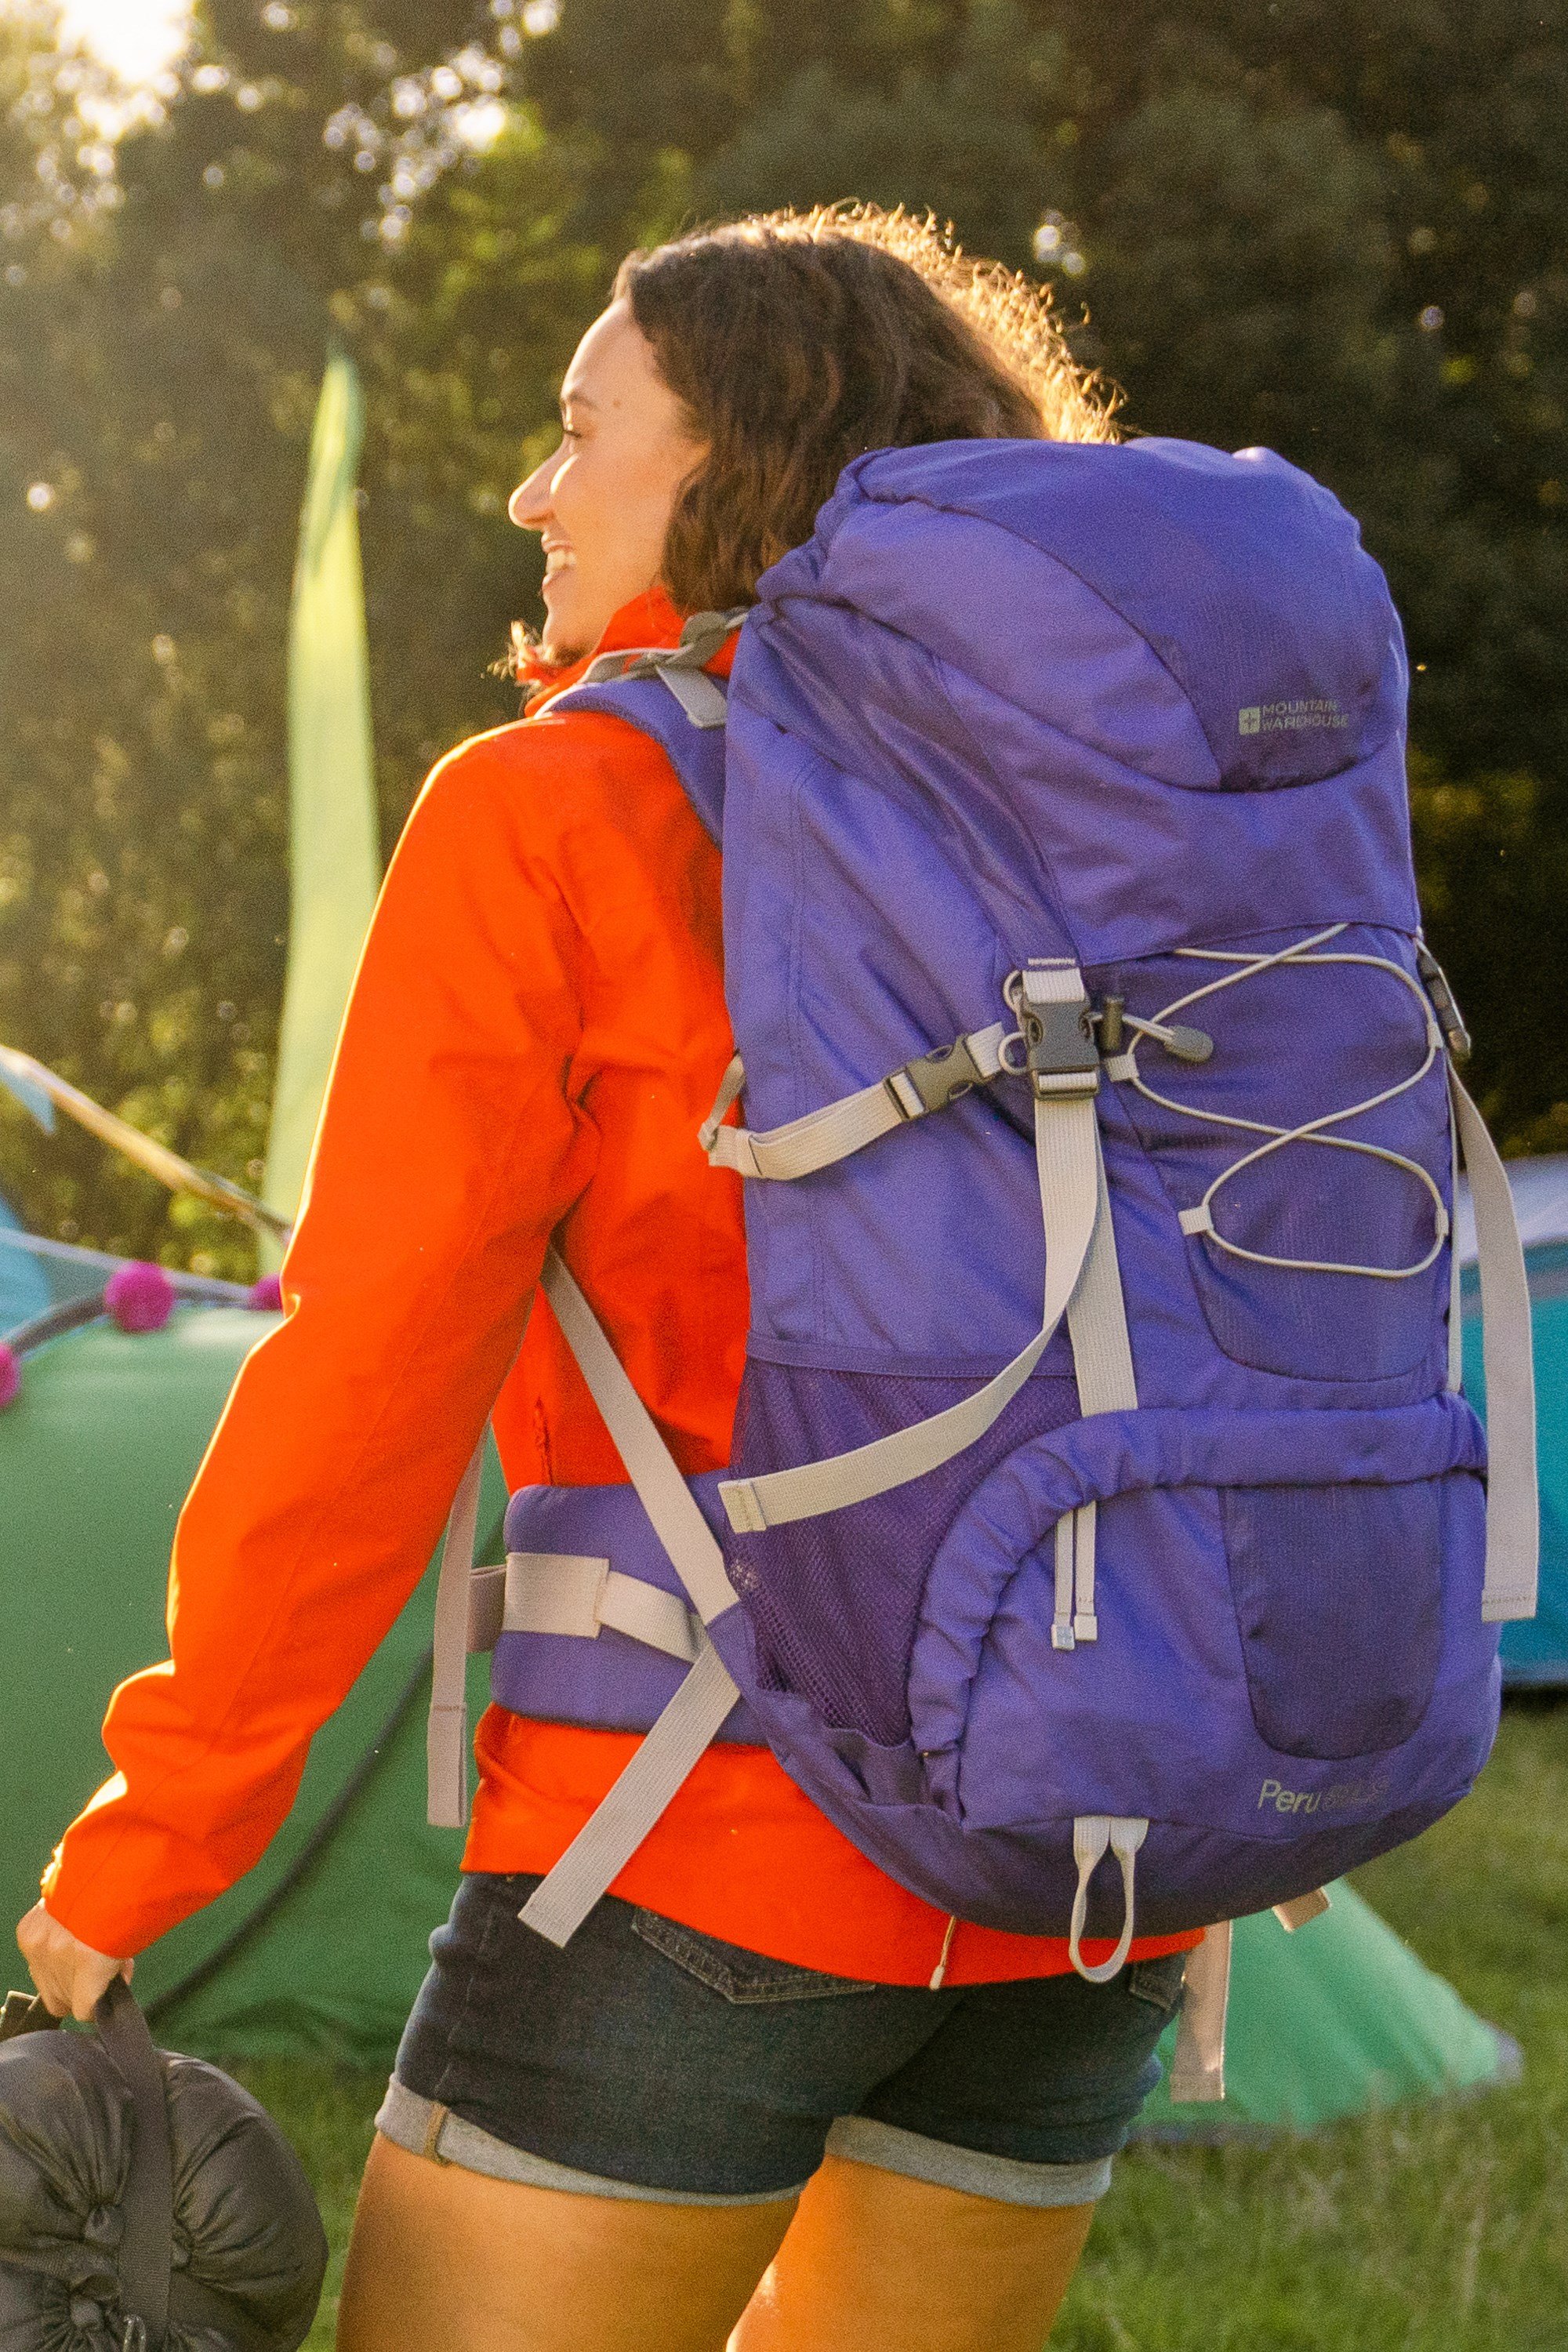 Large Backpacks for Travel | Mountain Warehouse US | Mountain